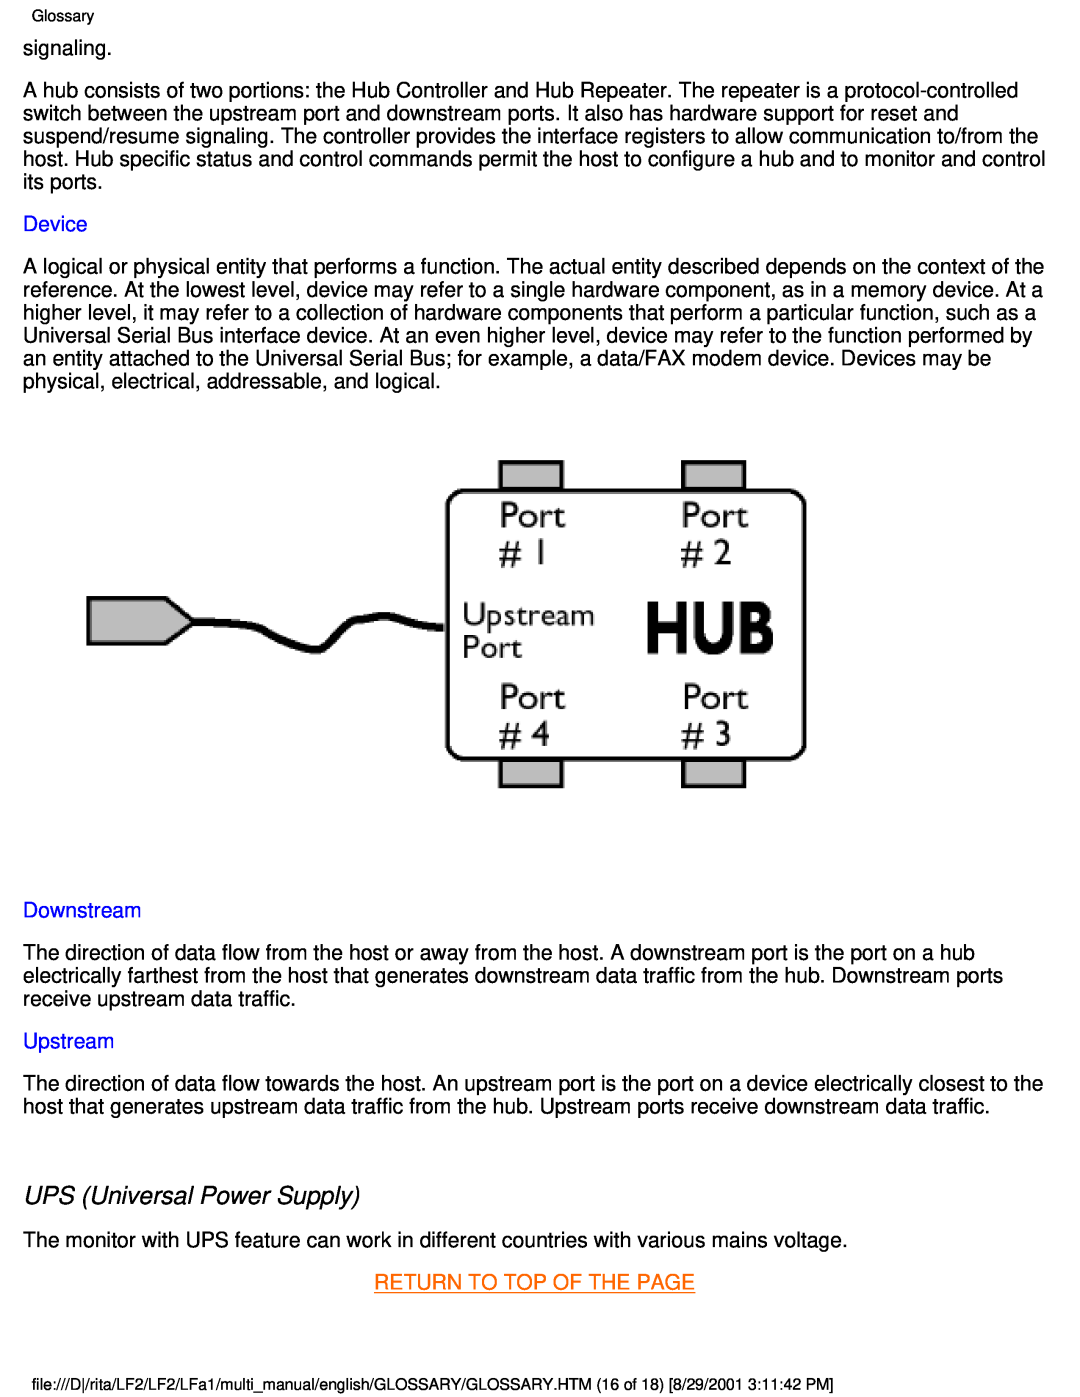 Philips 201B user manual UPS Universal Power Supply, Device, Downstream, Upstream, Return To Top Of The Page 